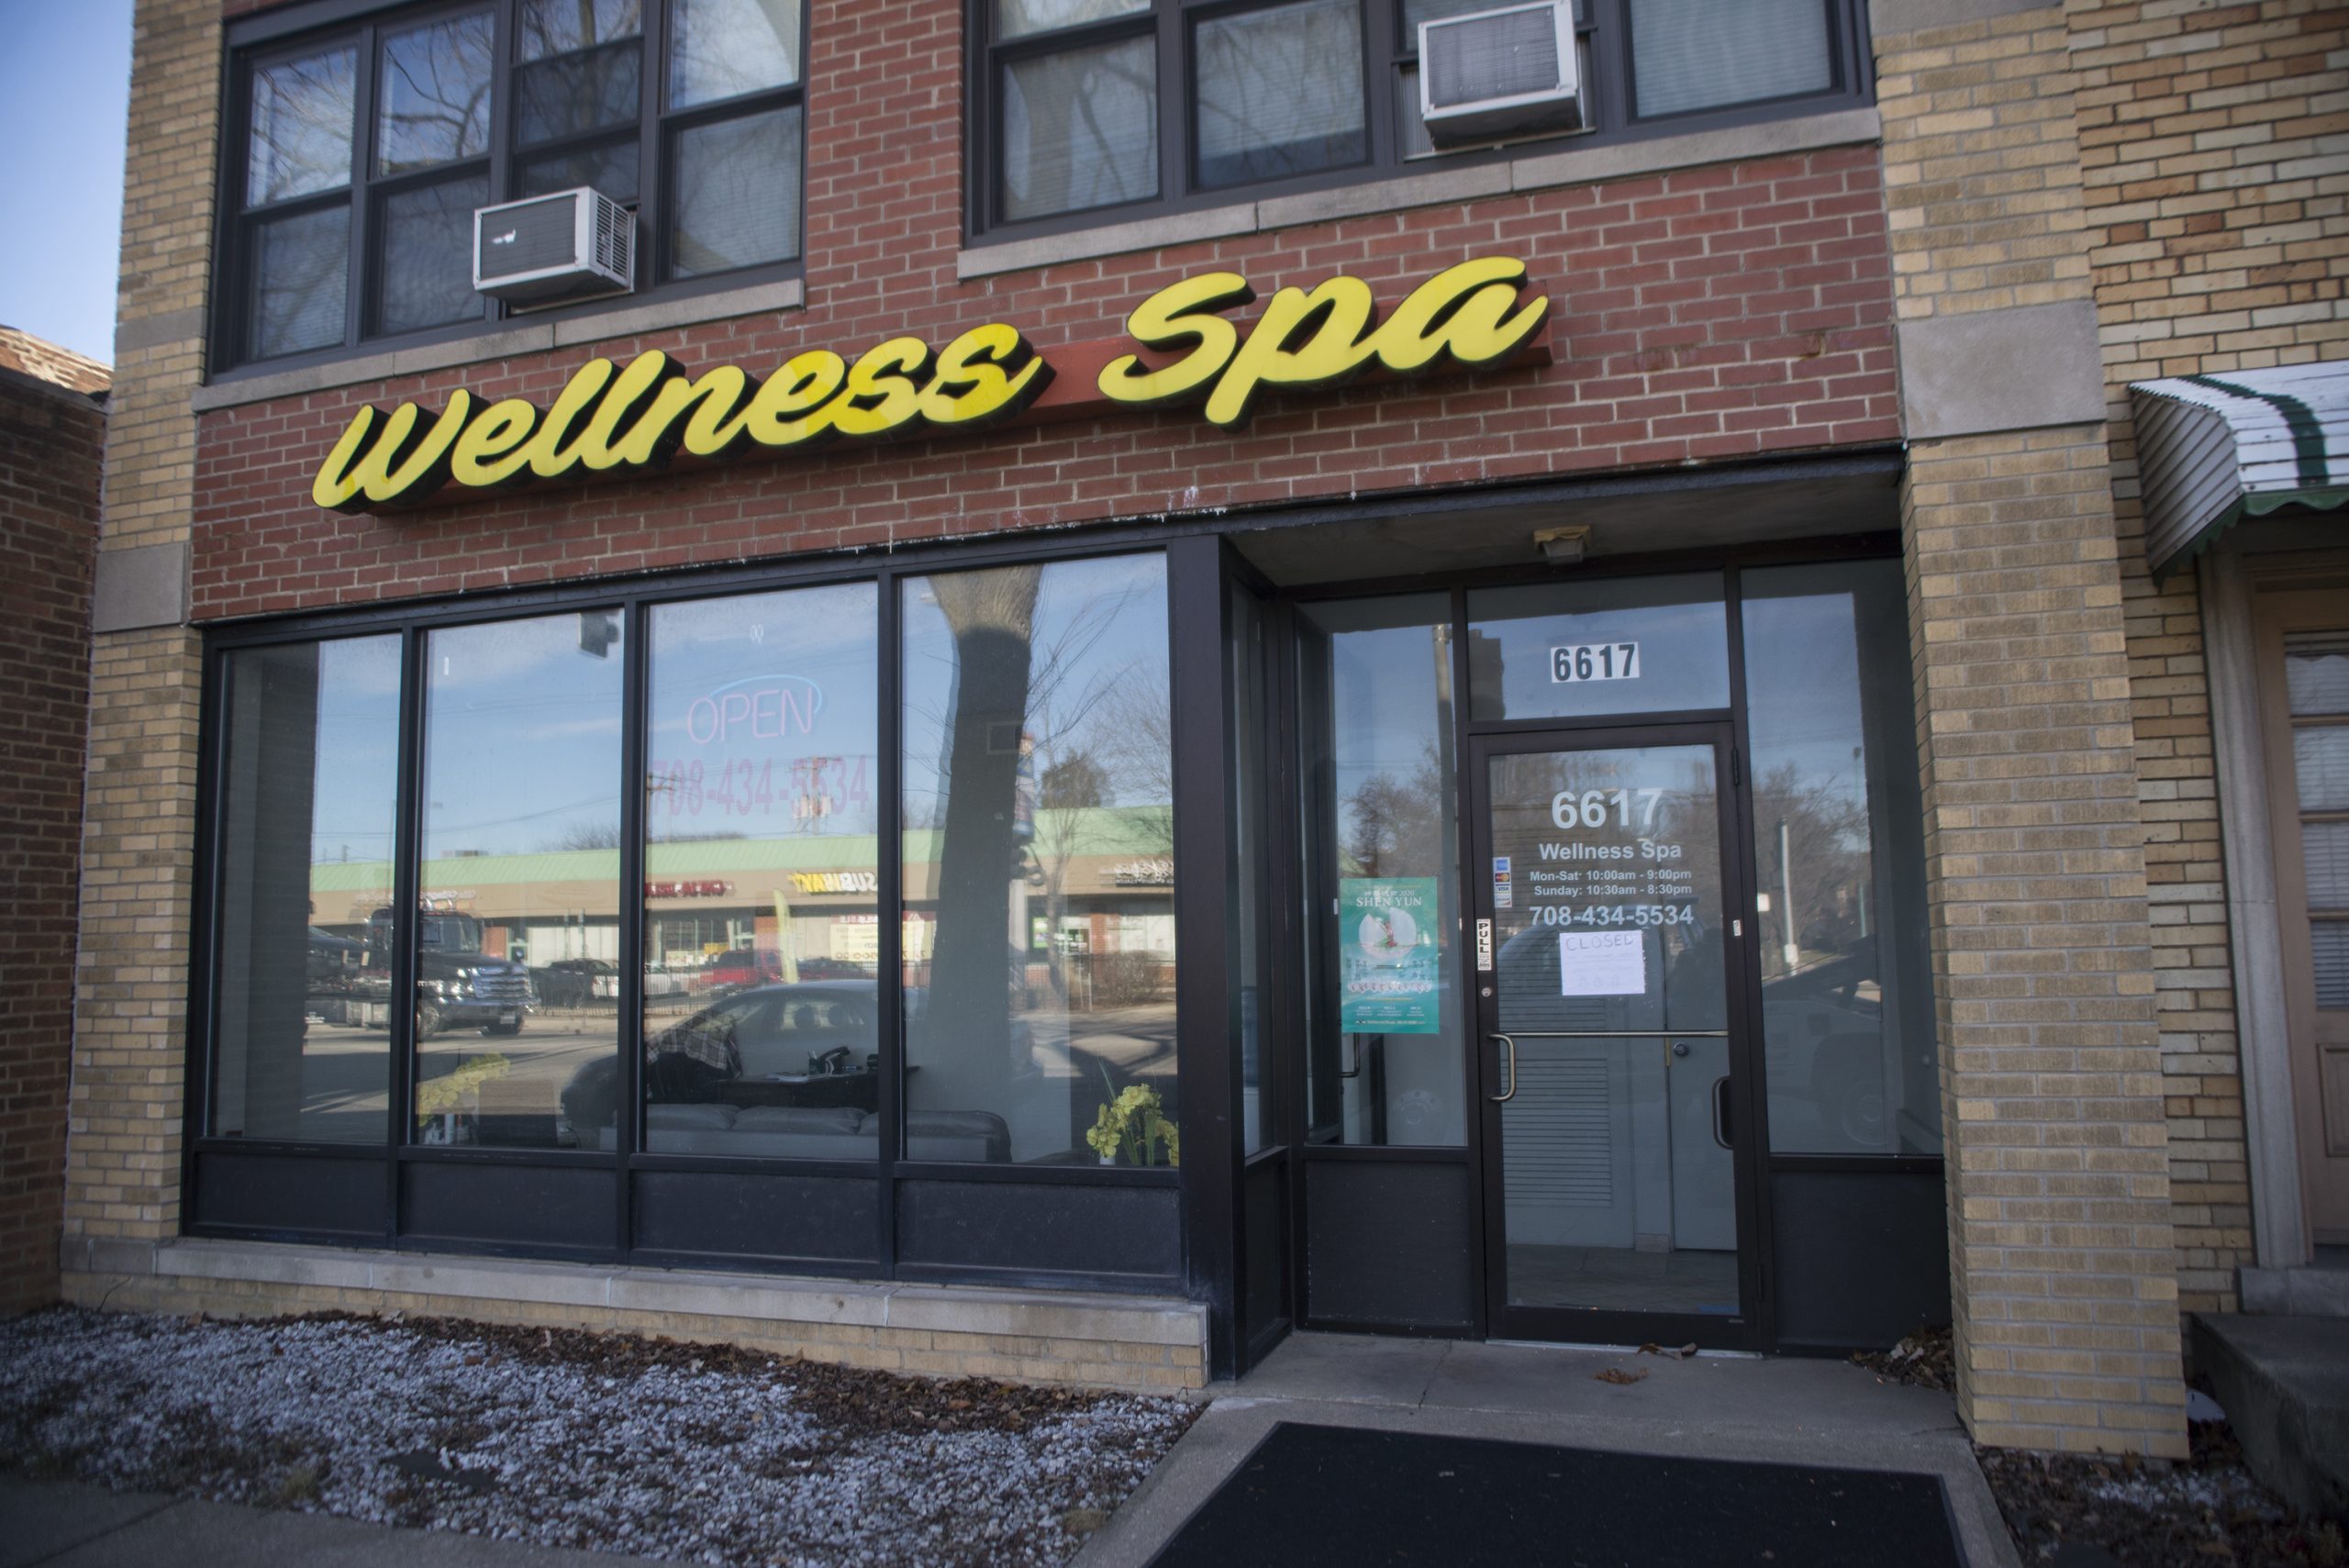 bee nava recommends massage parlor review chicago pic